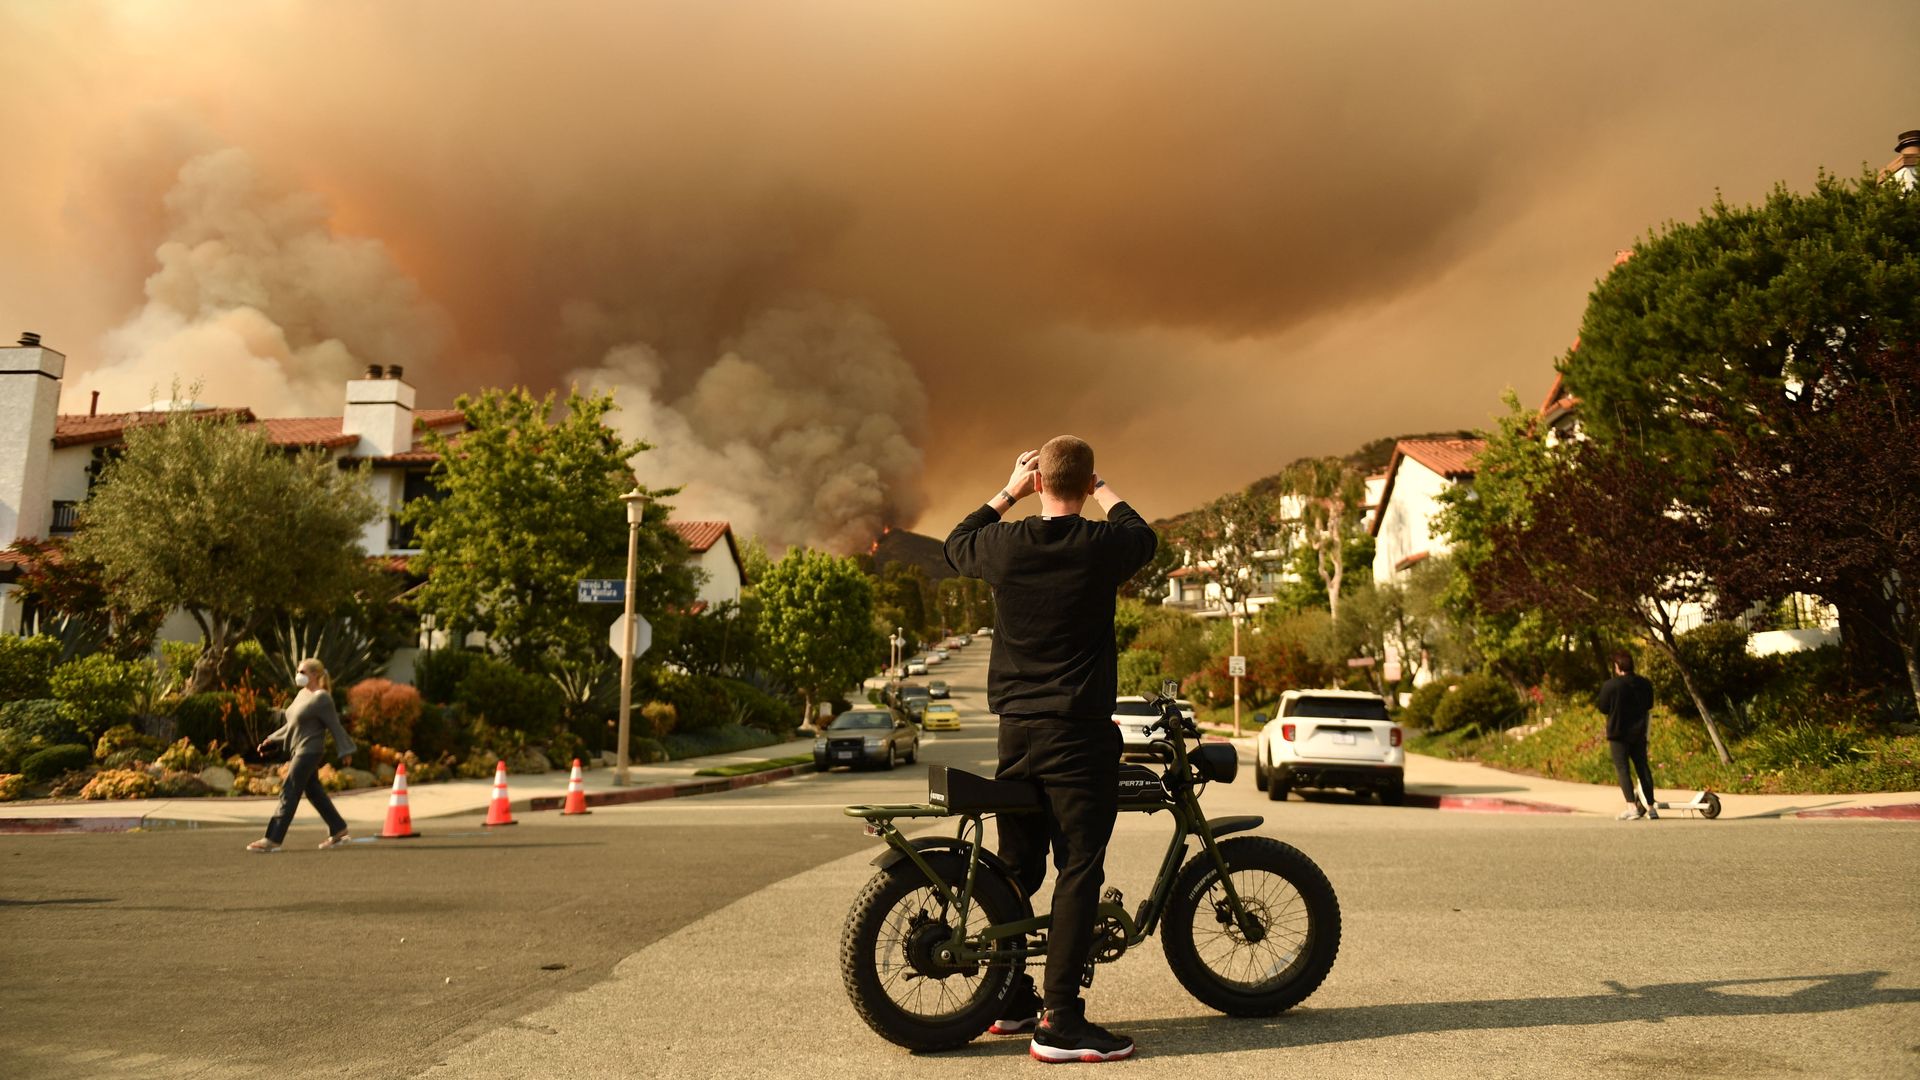 A man takes a photo of the plume of smoke created by the Palisades fire in Topanga State Park, North West of Los Angeles on May 15, 2021.